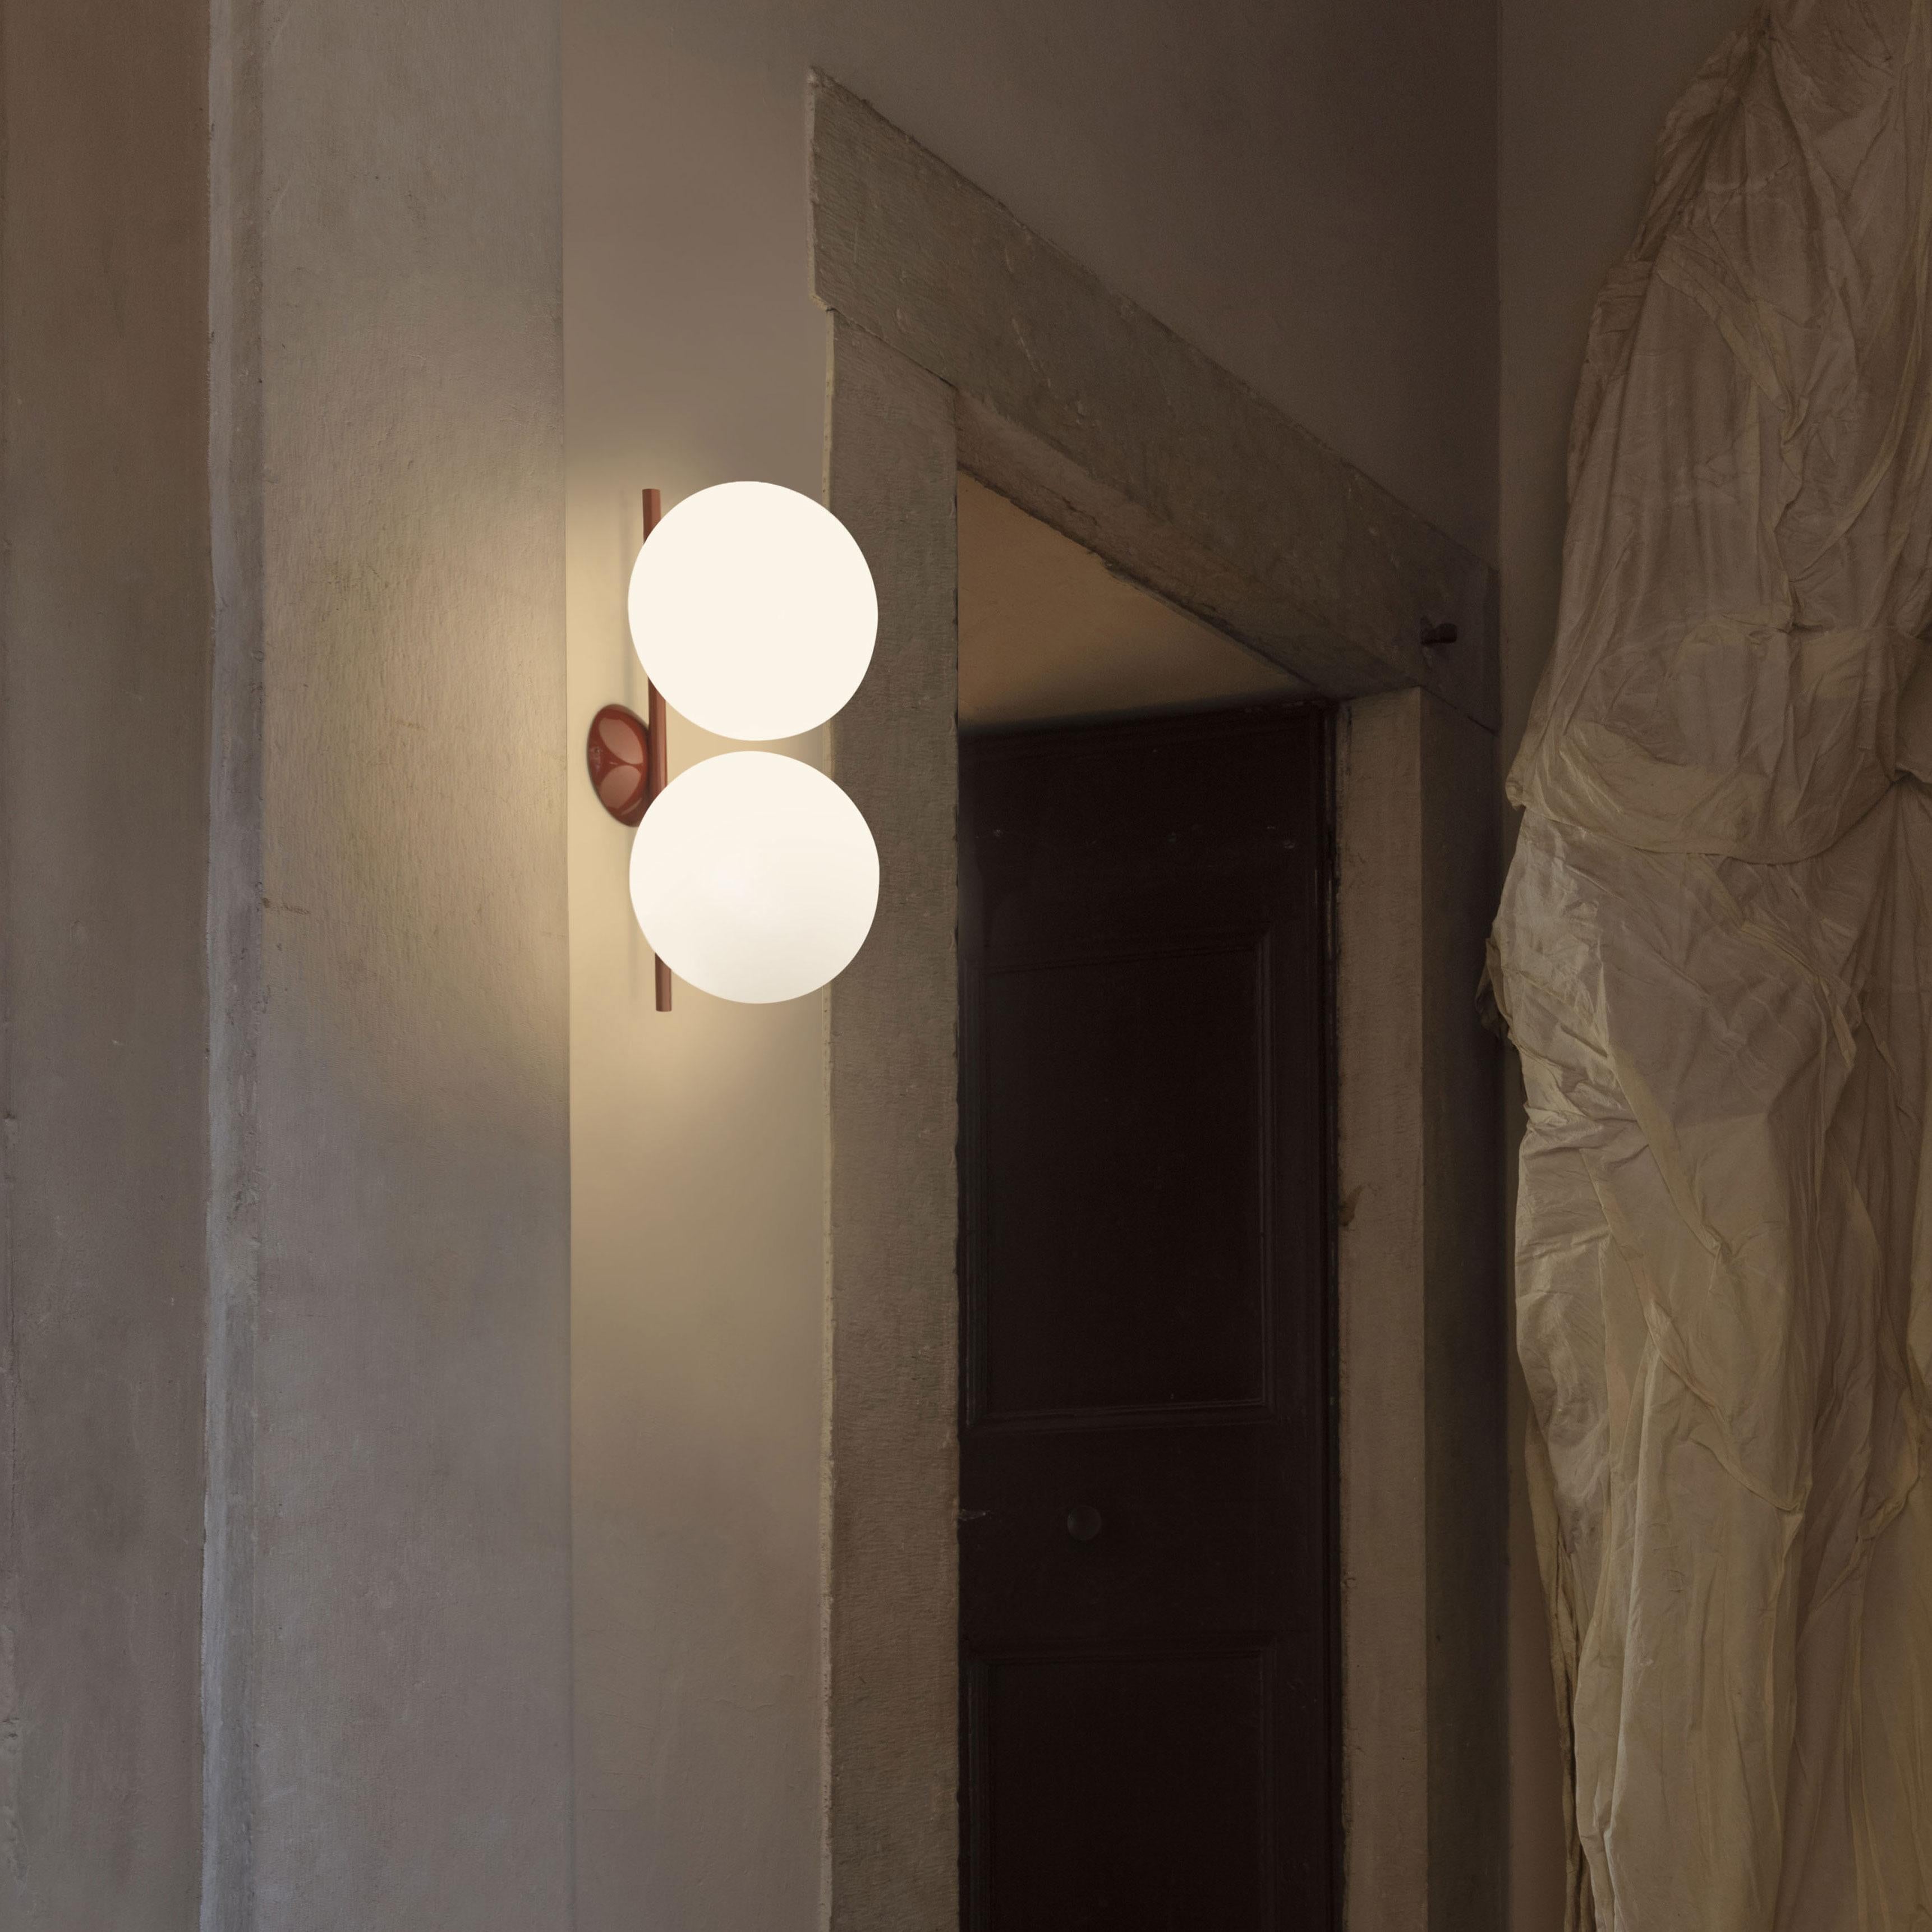 The latest addition to the IC Lights Collection: New IC Lights Ceiling/Wall Double comes with a double light source providing diffused light.The modern ceiling and wall sconce fixture gives a sense of serene calm and elegance to any stairwell,